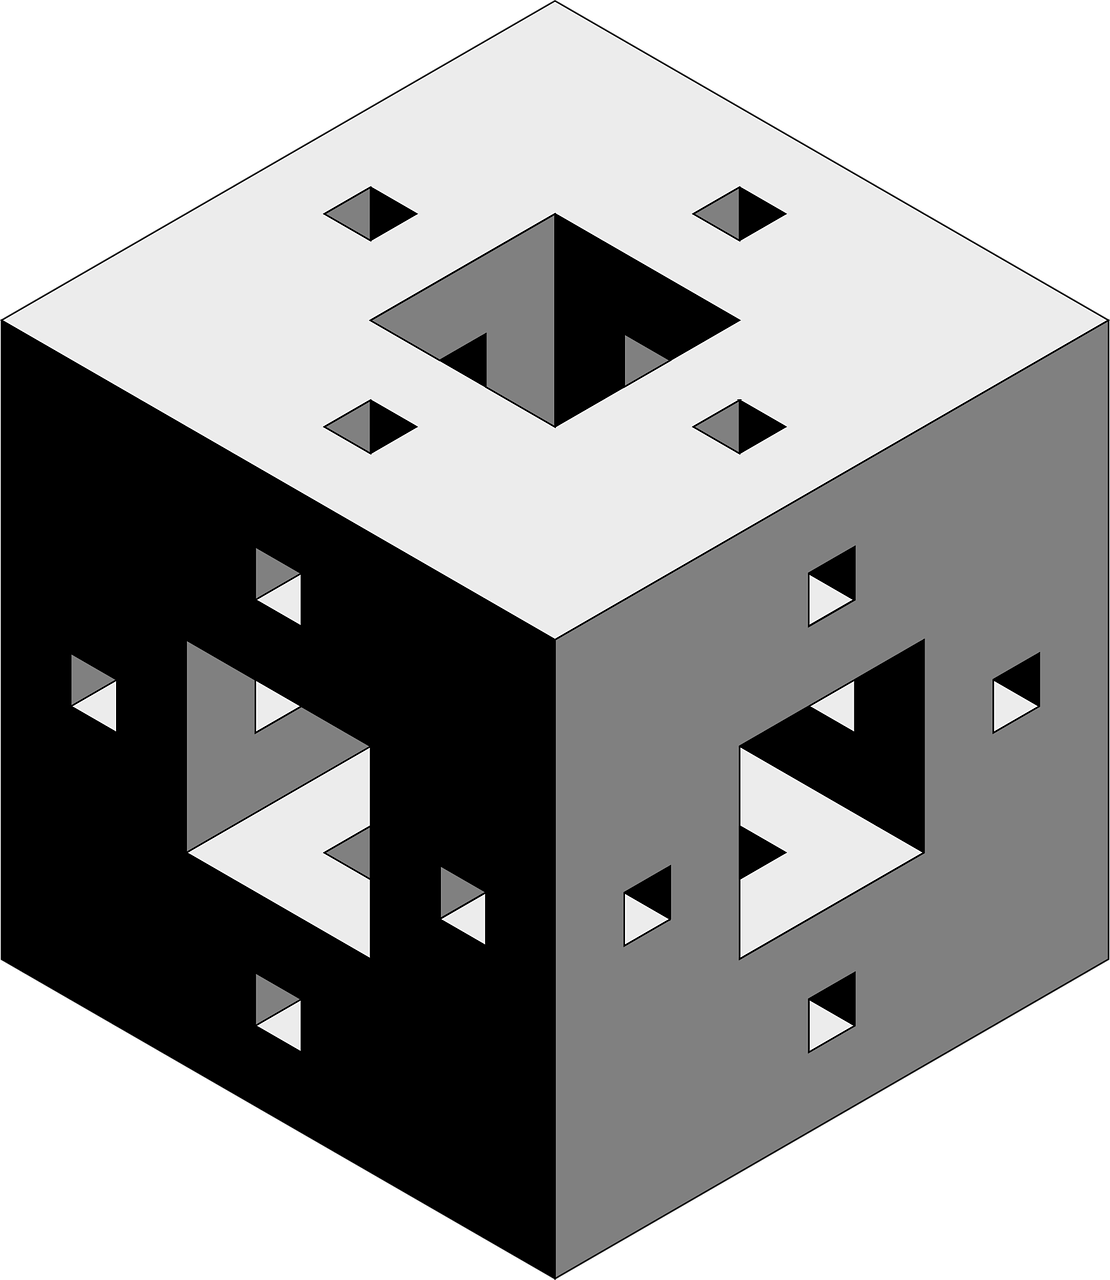 a black and white image of a cube, a computer rendering, inspired by MC Escher, reddit, sierpinski gasket, vertical symmetry, isometric view, rendered illustration